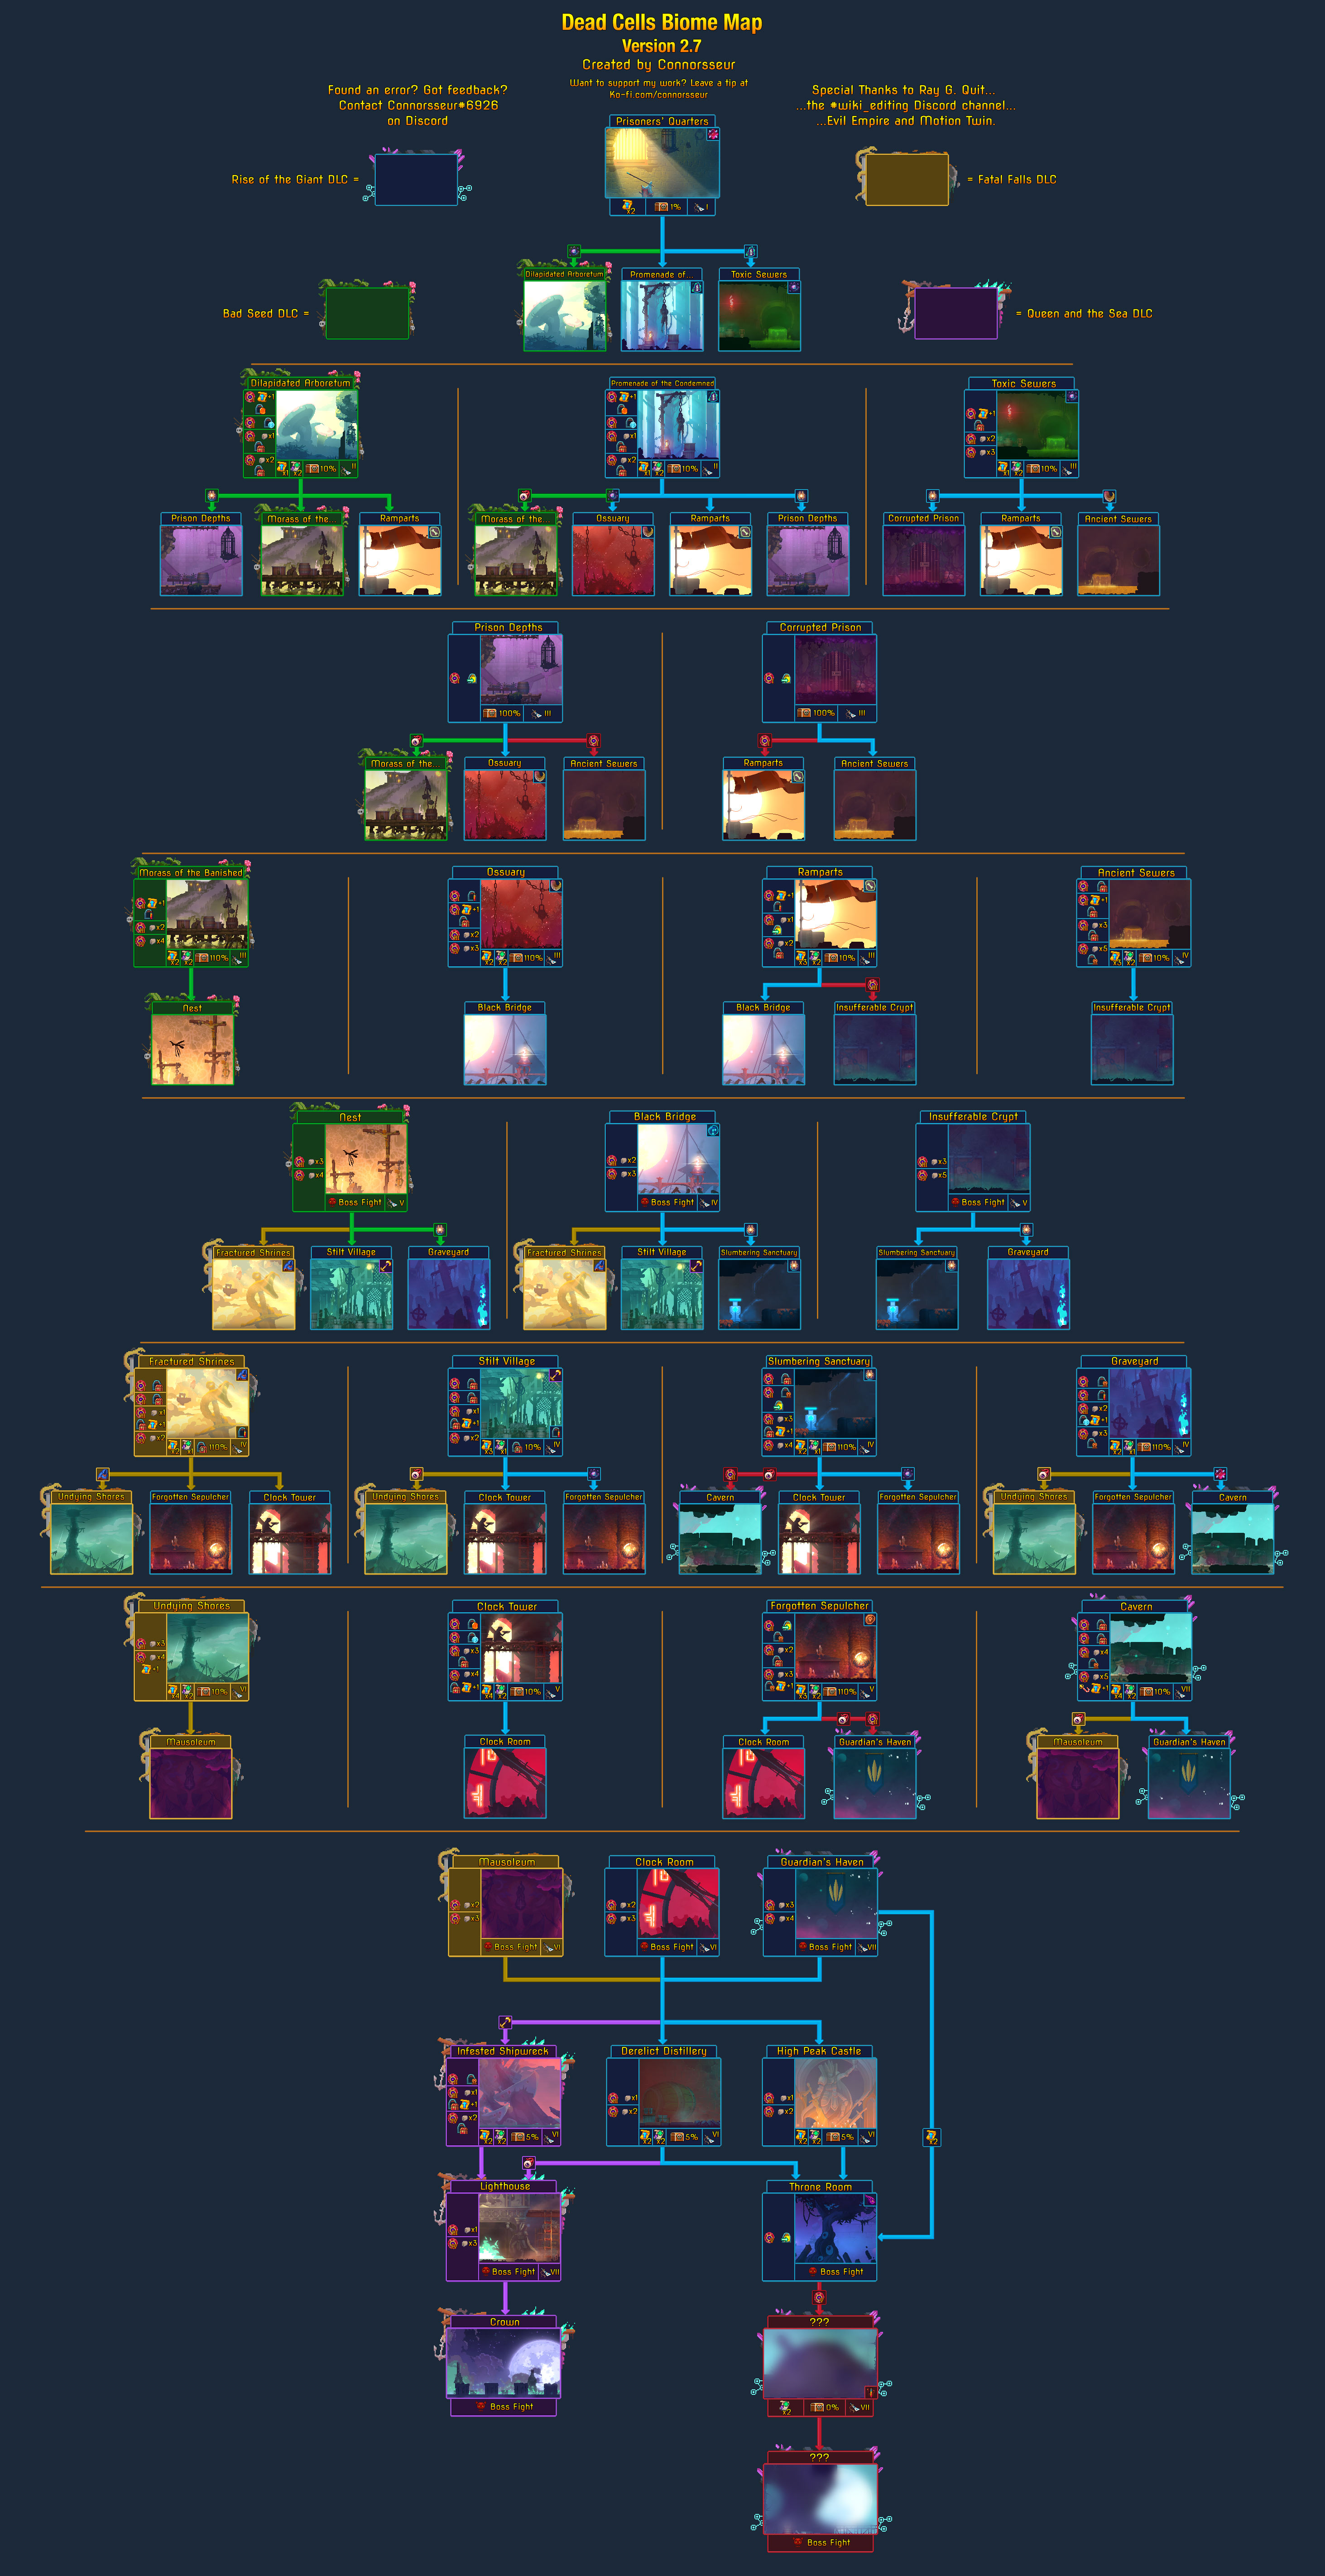 Dead Cells Biome Map - V2.7 - Biome Map - 3C0D271